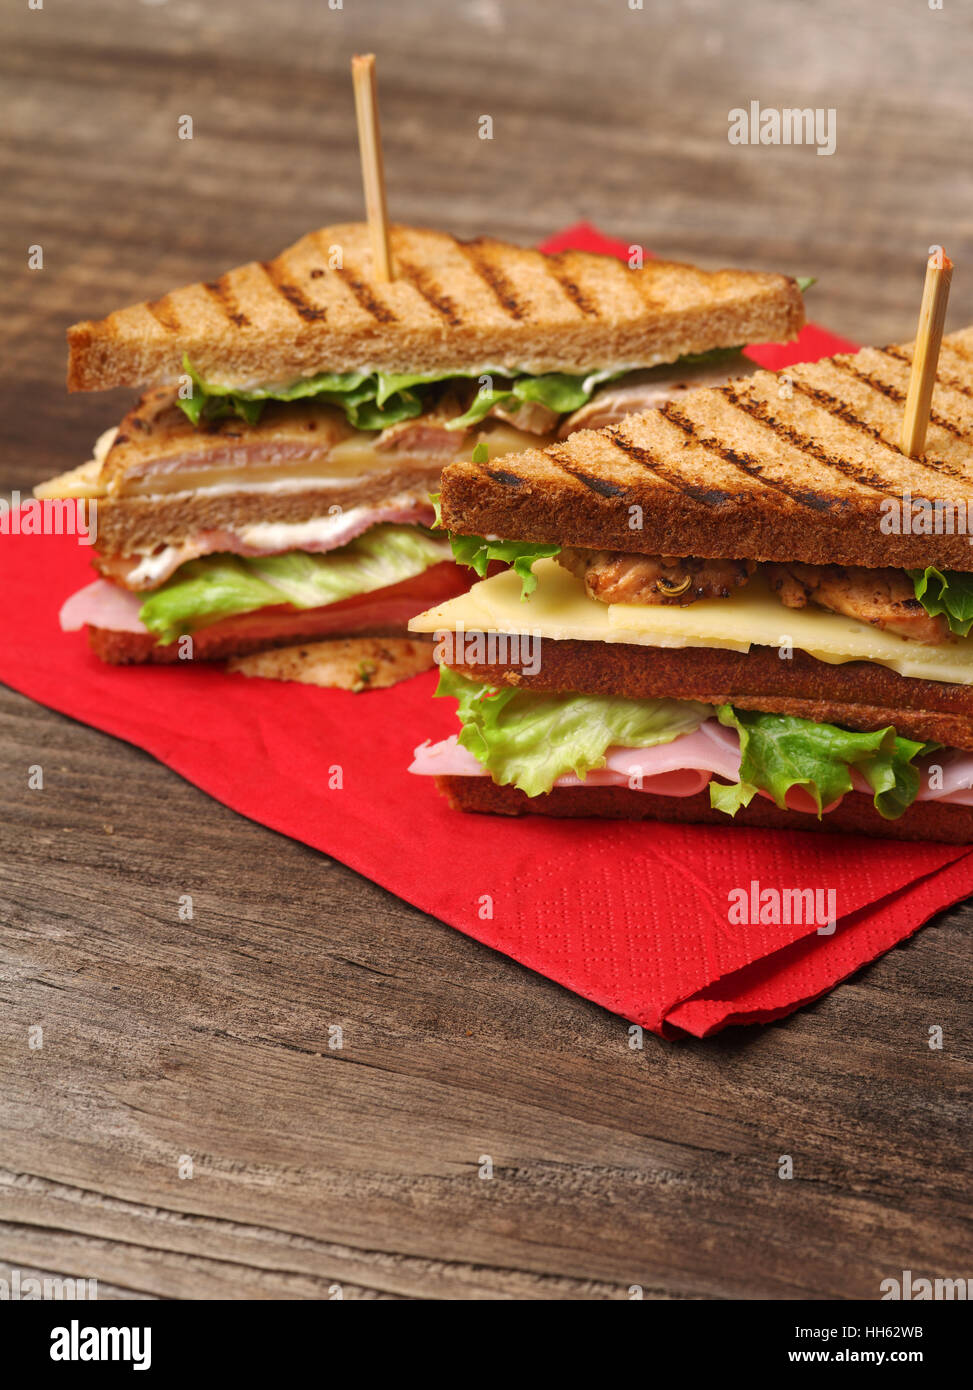 Photo of a club sandwich made with turkey, bacon, ham, tomato, cheese, lettuce on a red napkin and old wood picnic table. Stock Photo